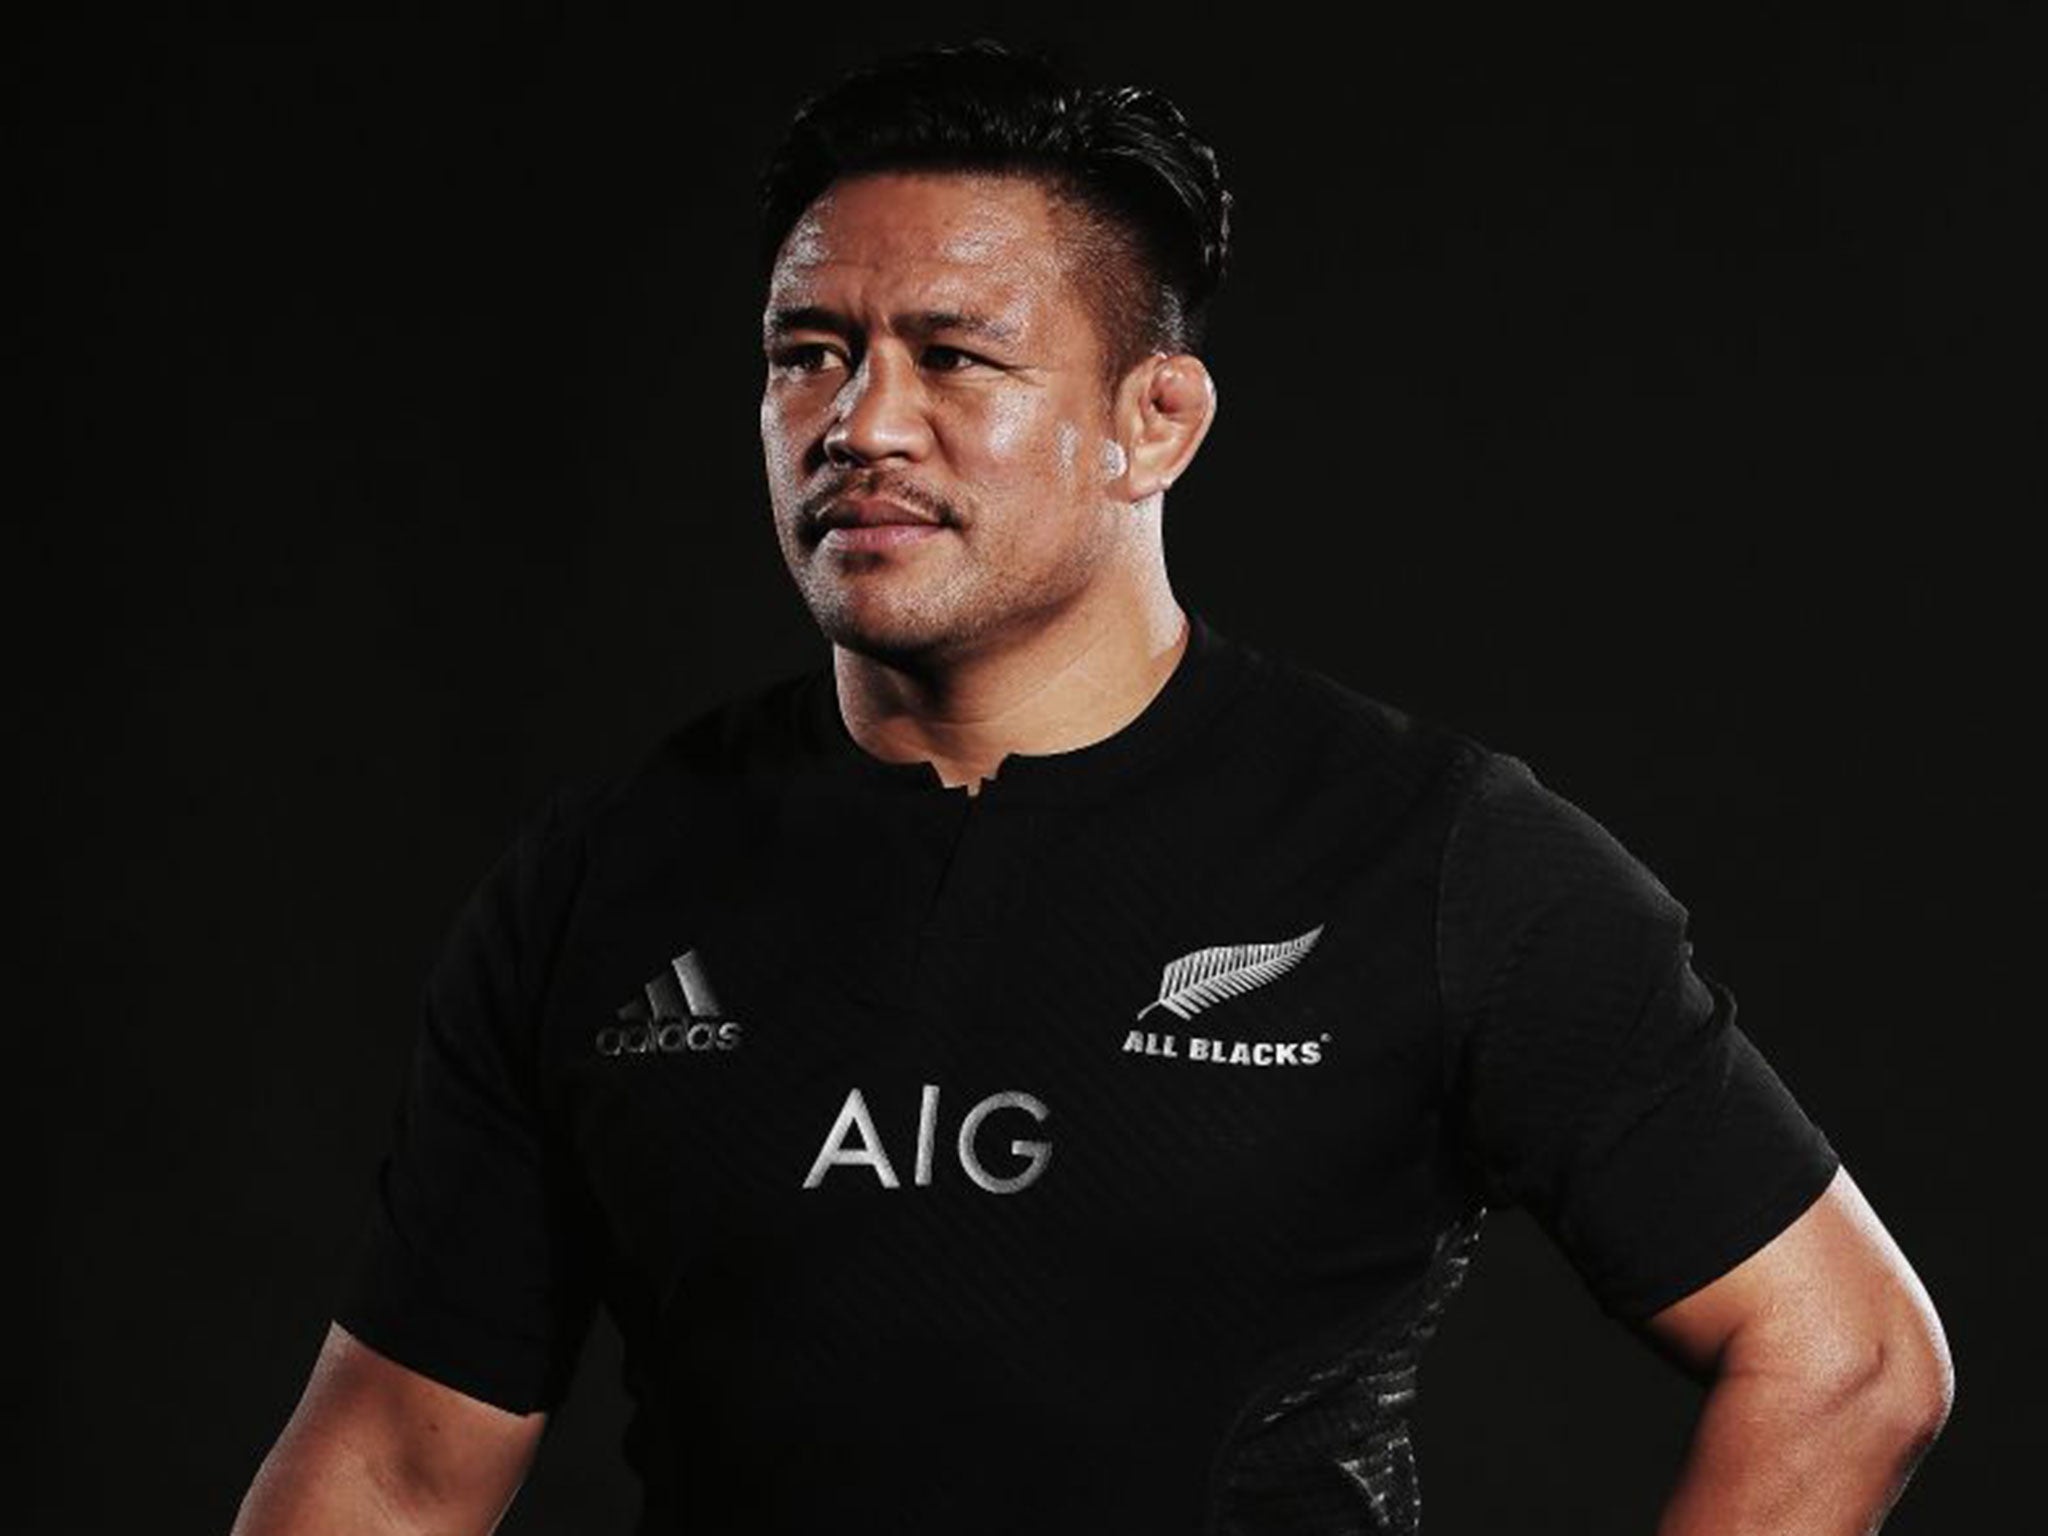 Keven Mealamu of the All Blacks poses for a photo during the New Zealand All Blacks portrait session